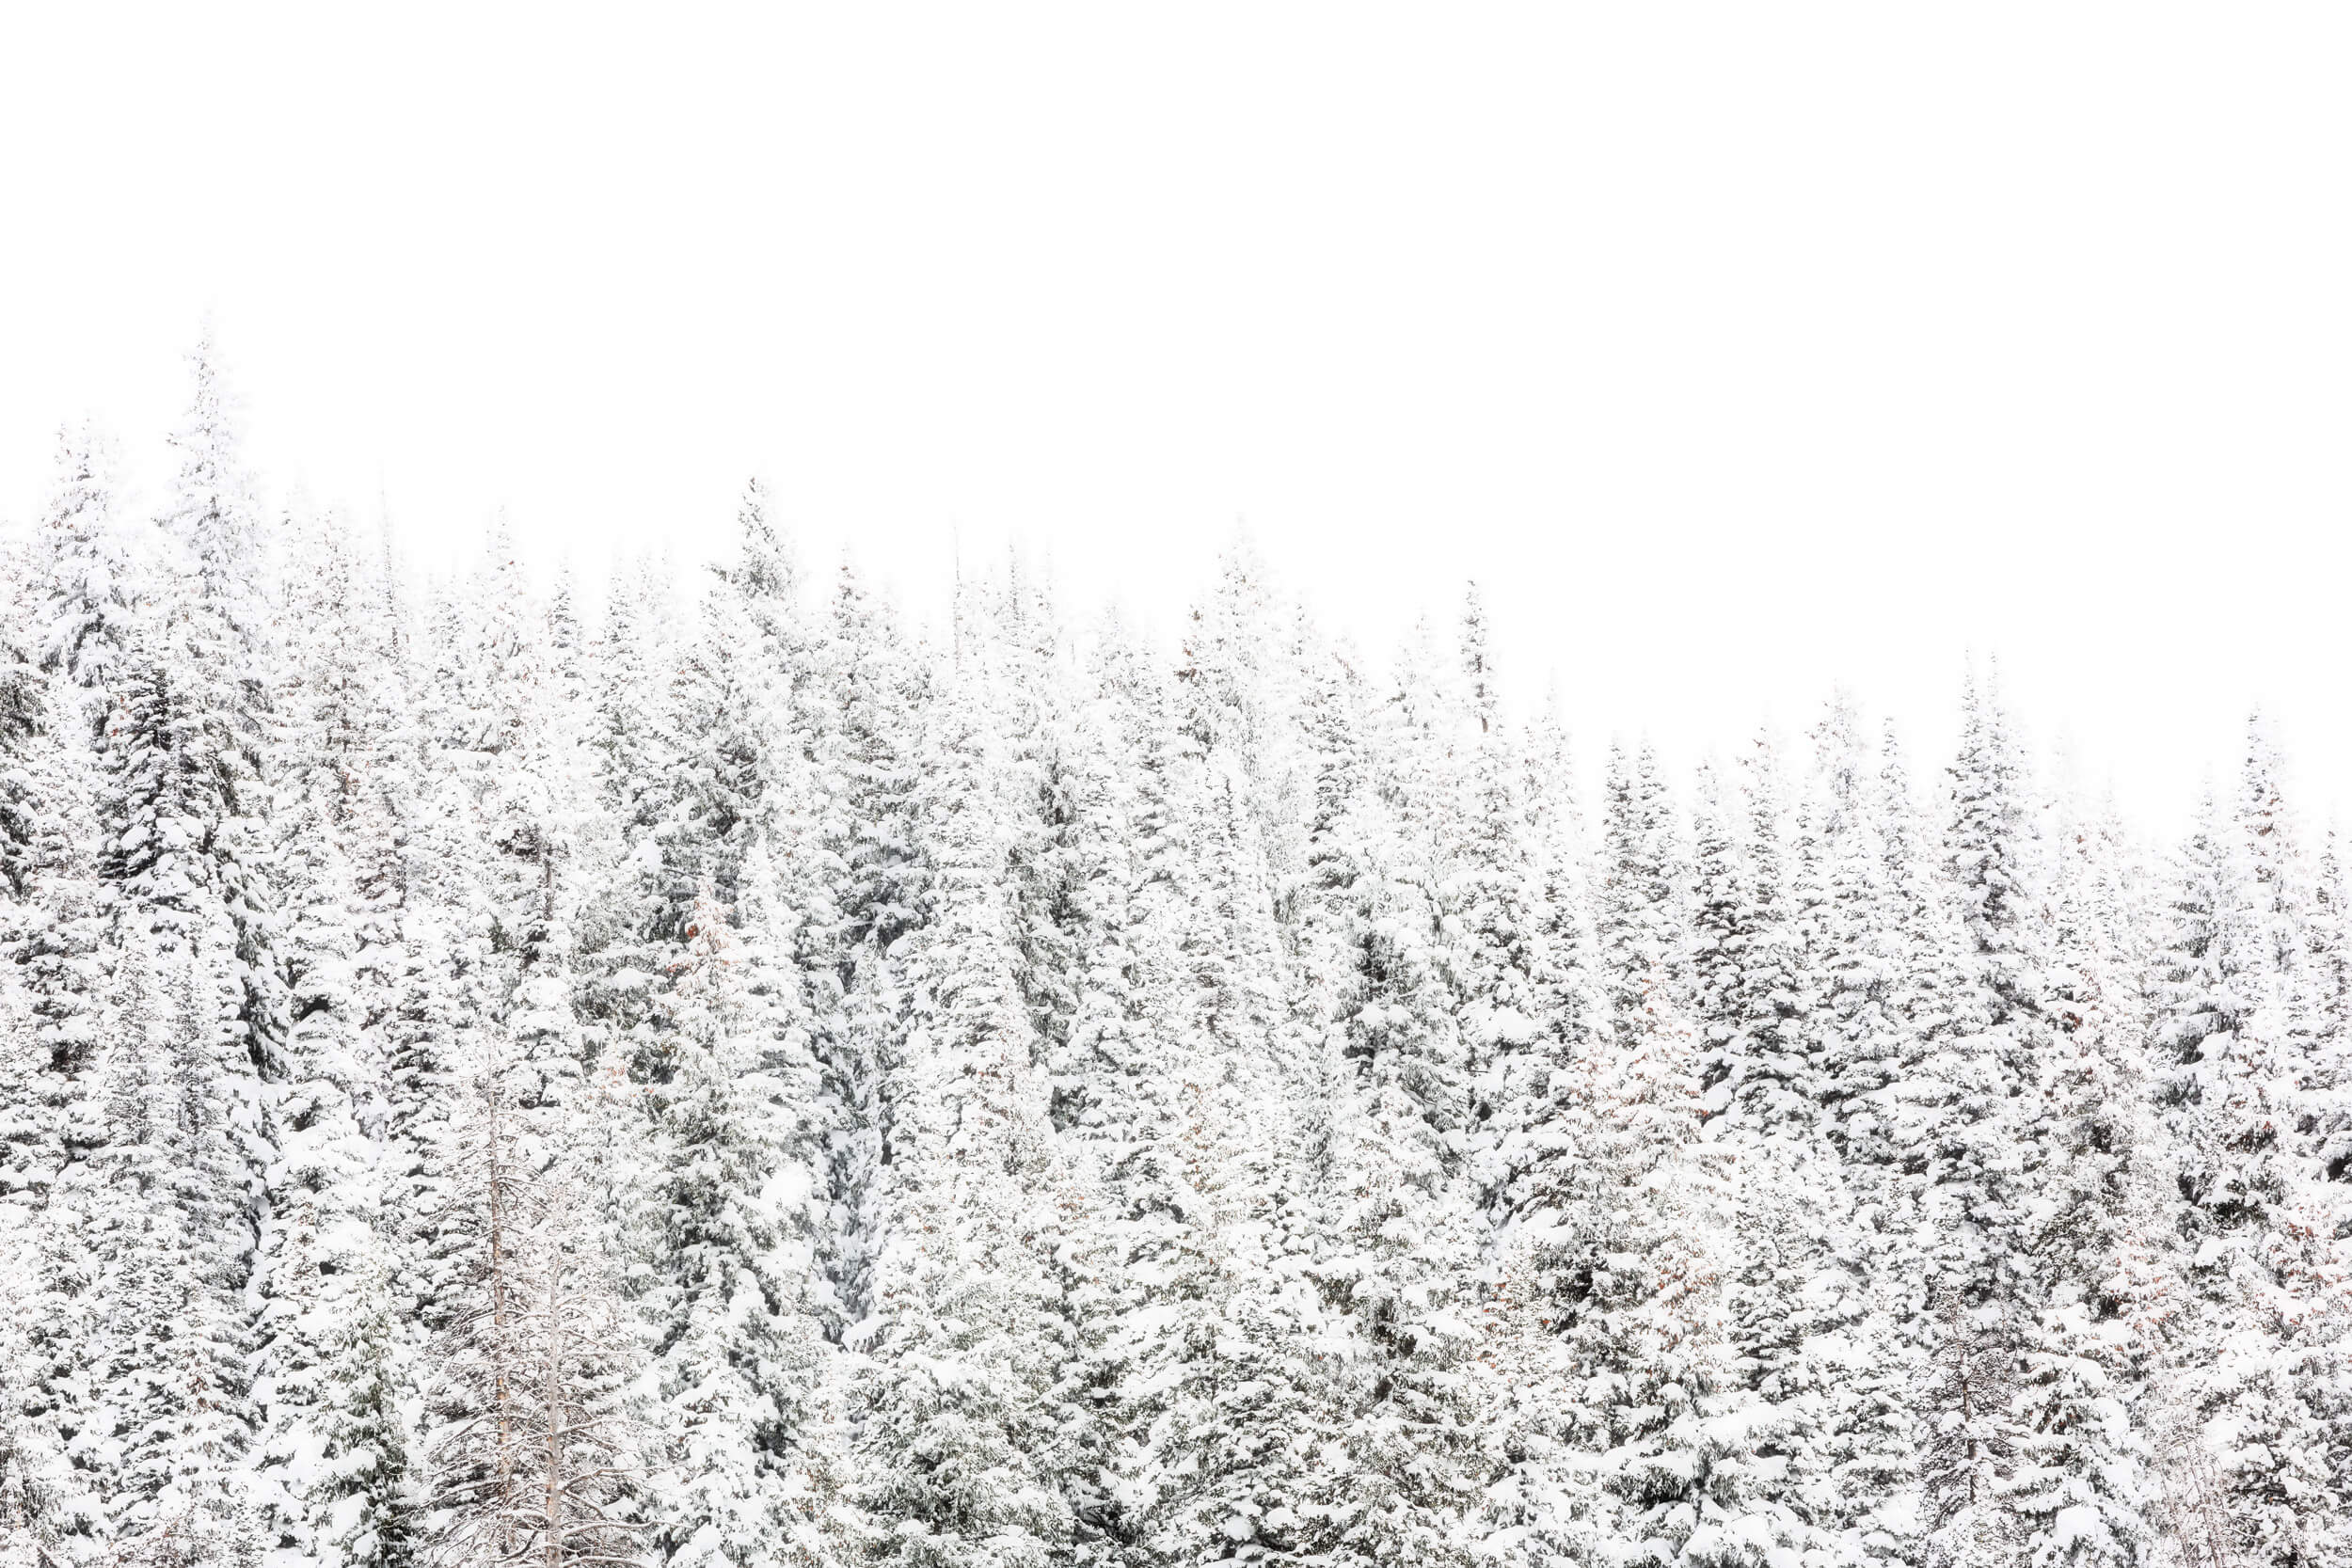 A picture of snowy trees outside of Steamboat Springs Ski Resort in Colorado.